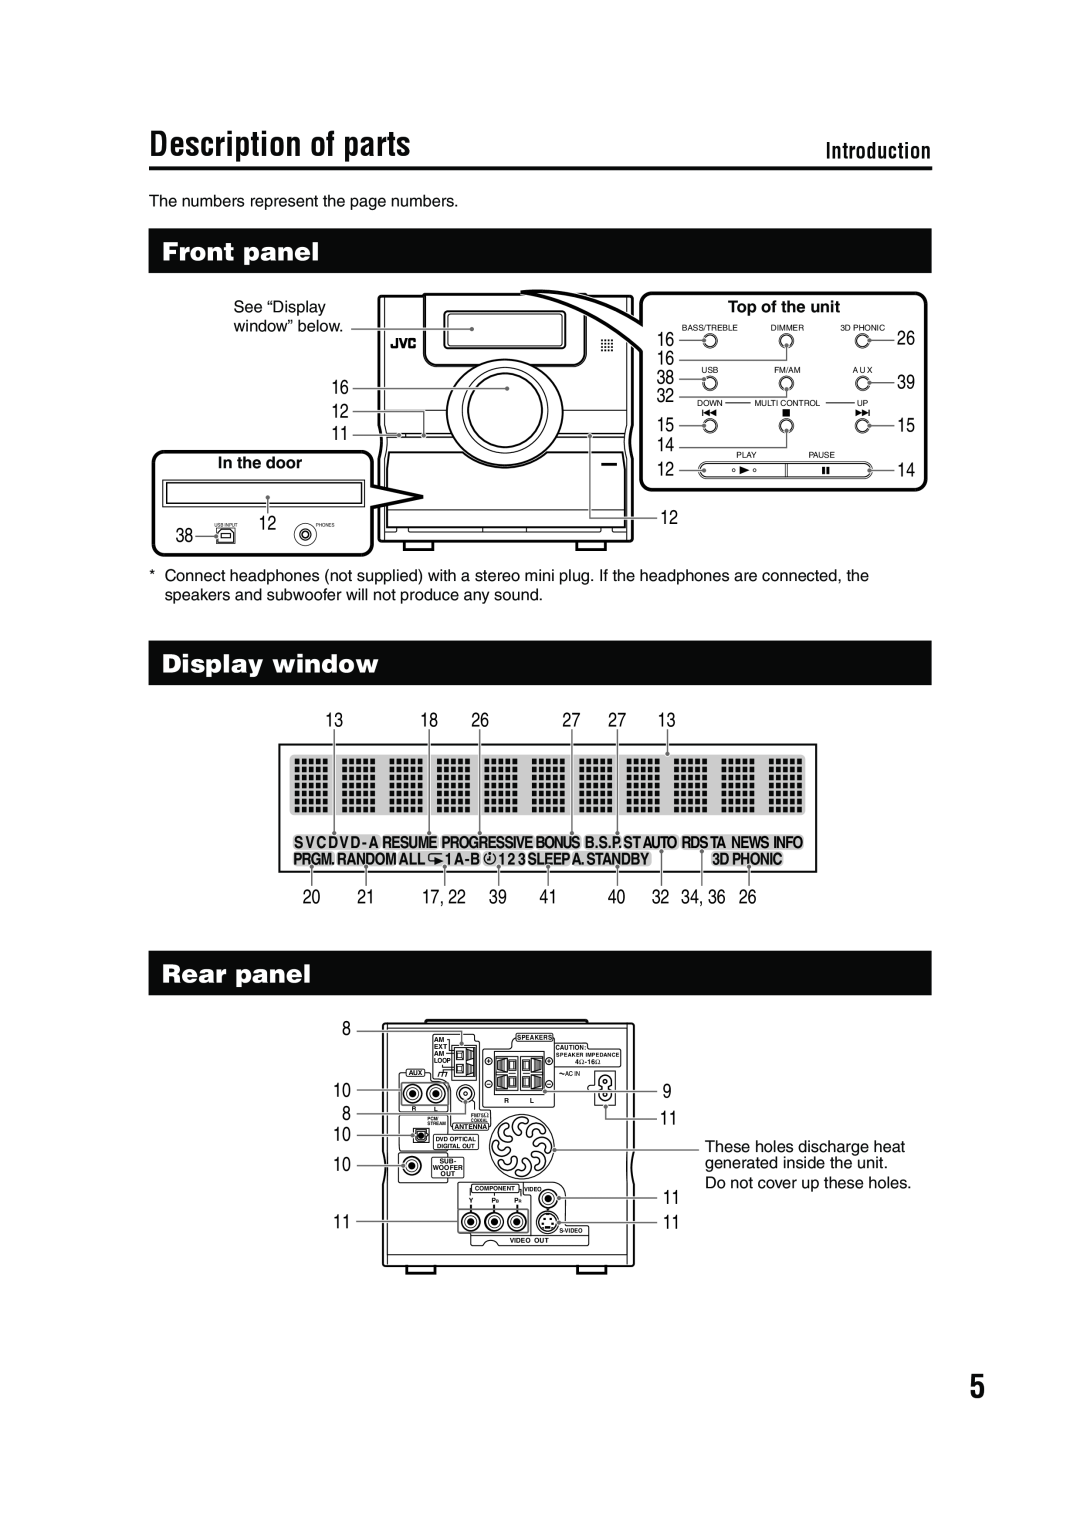 JVC GVT0143-008A Description of parts, Front panel, Display window, Rear panel, Top of the unit, In the door, Introduction 